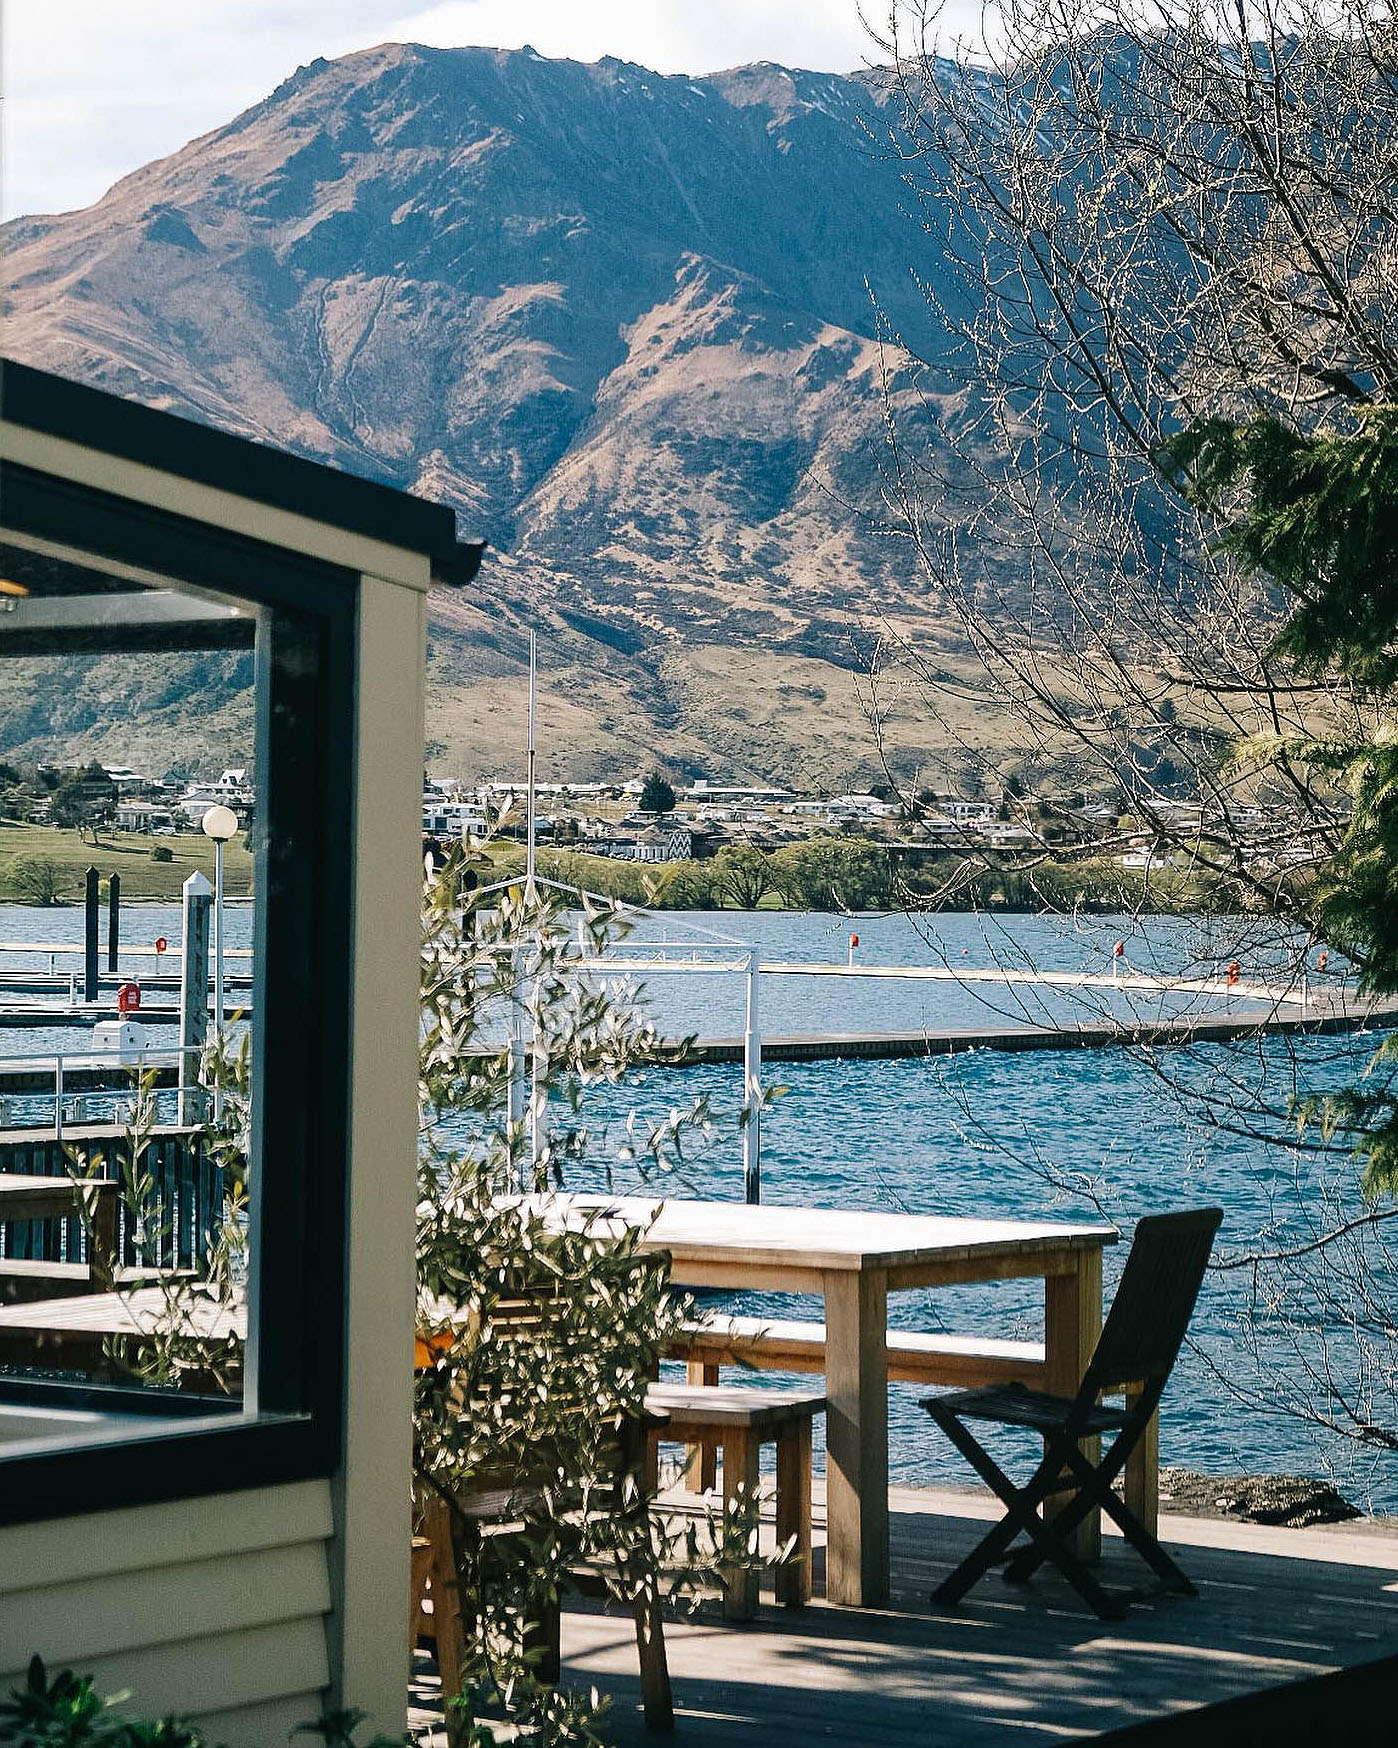 The outdoor dining space at The Boat Shed over overlooking the mountains